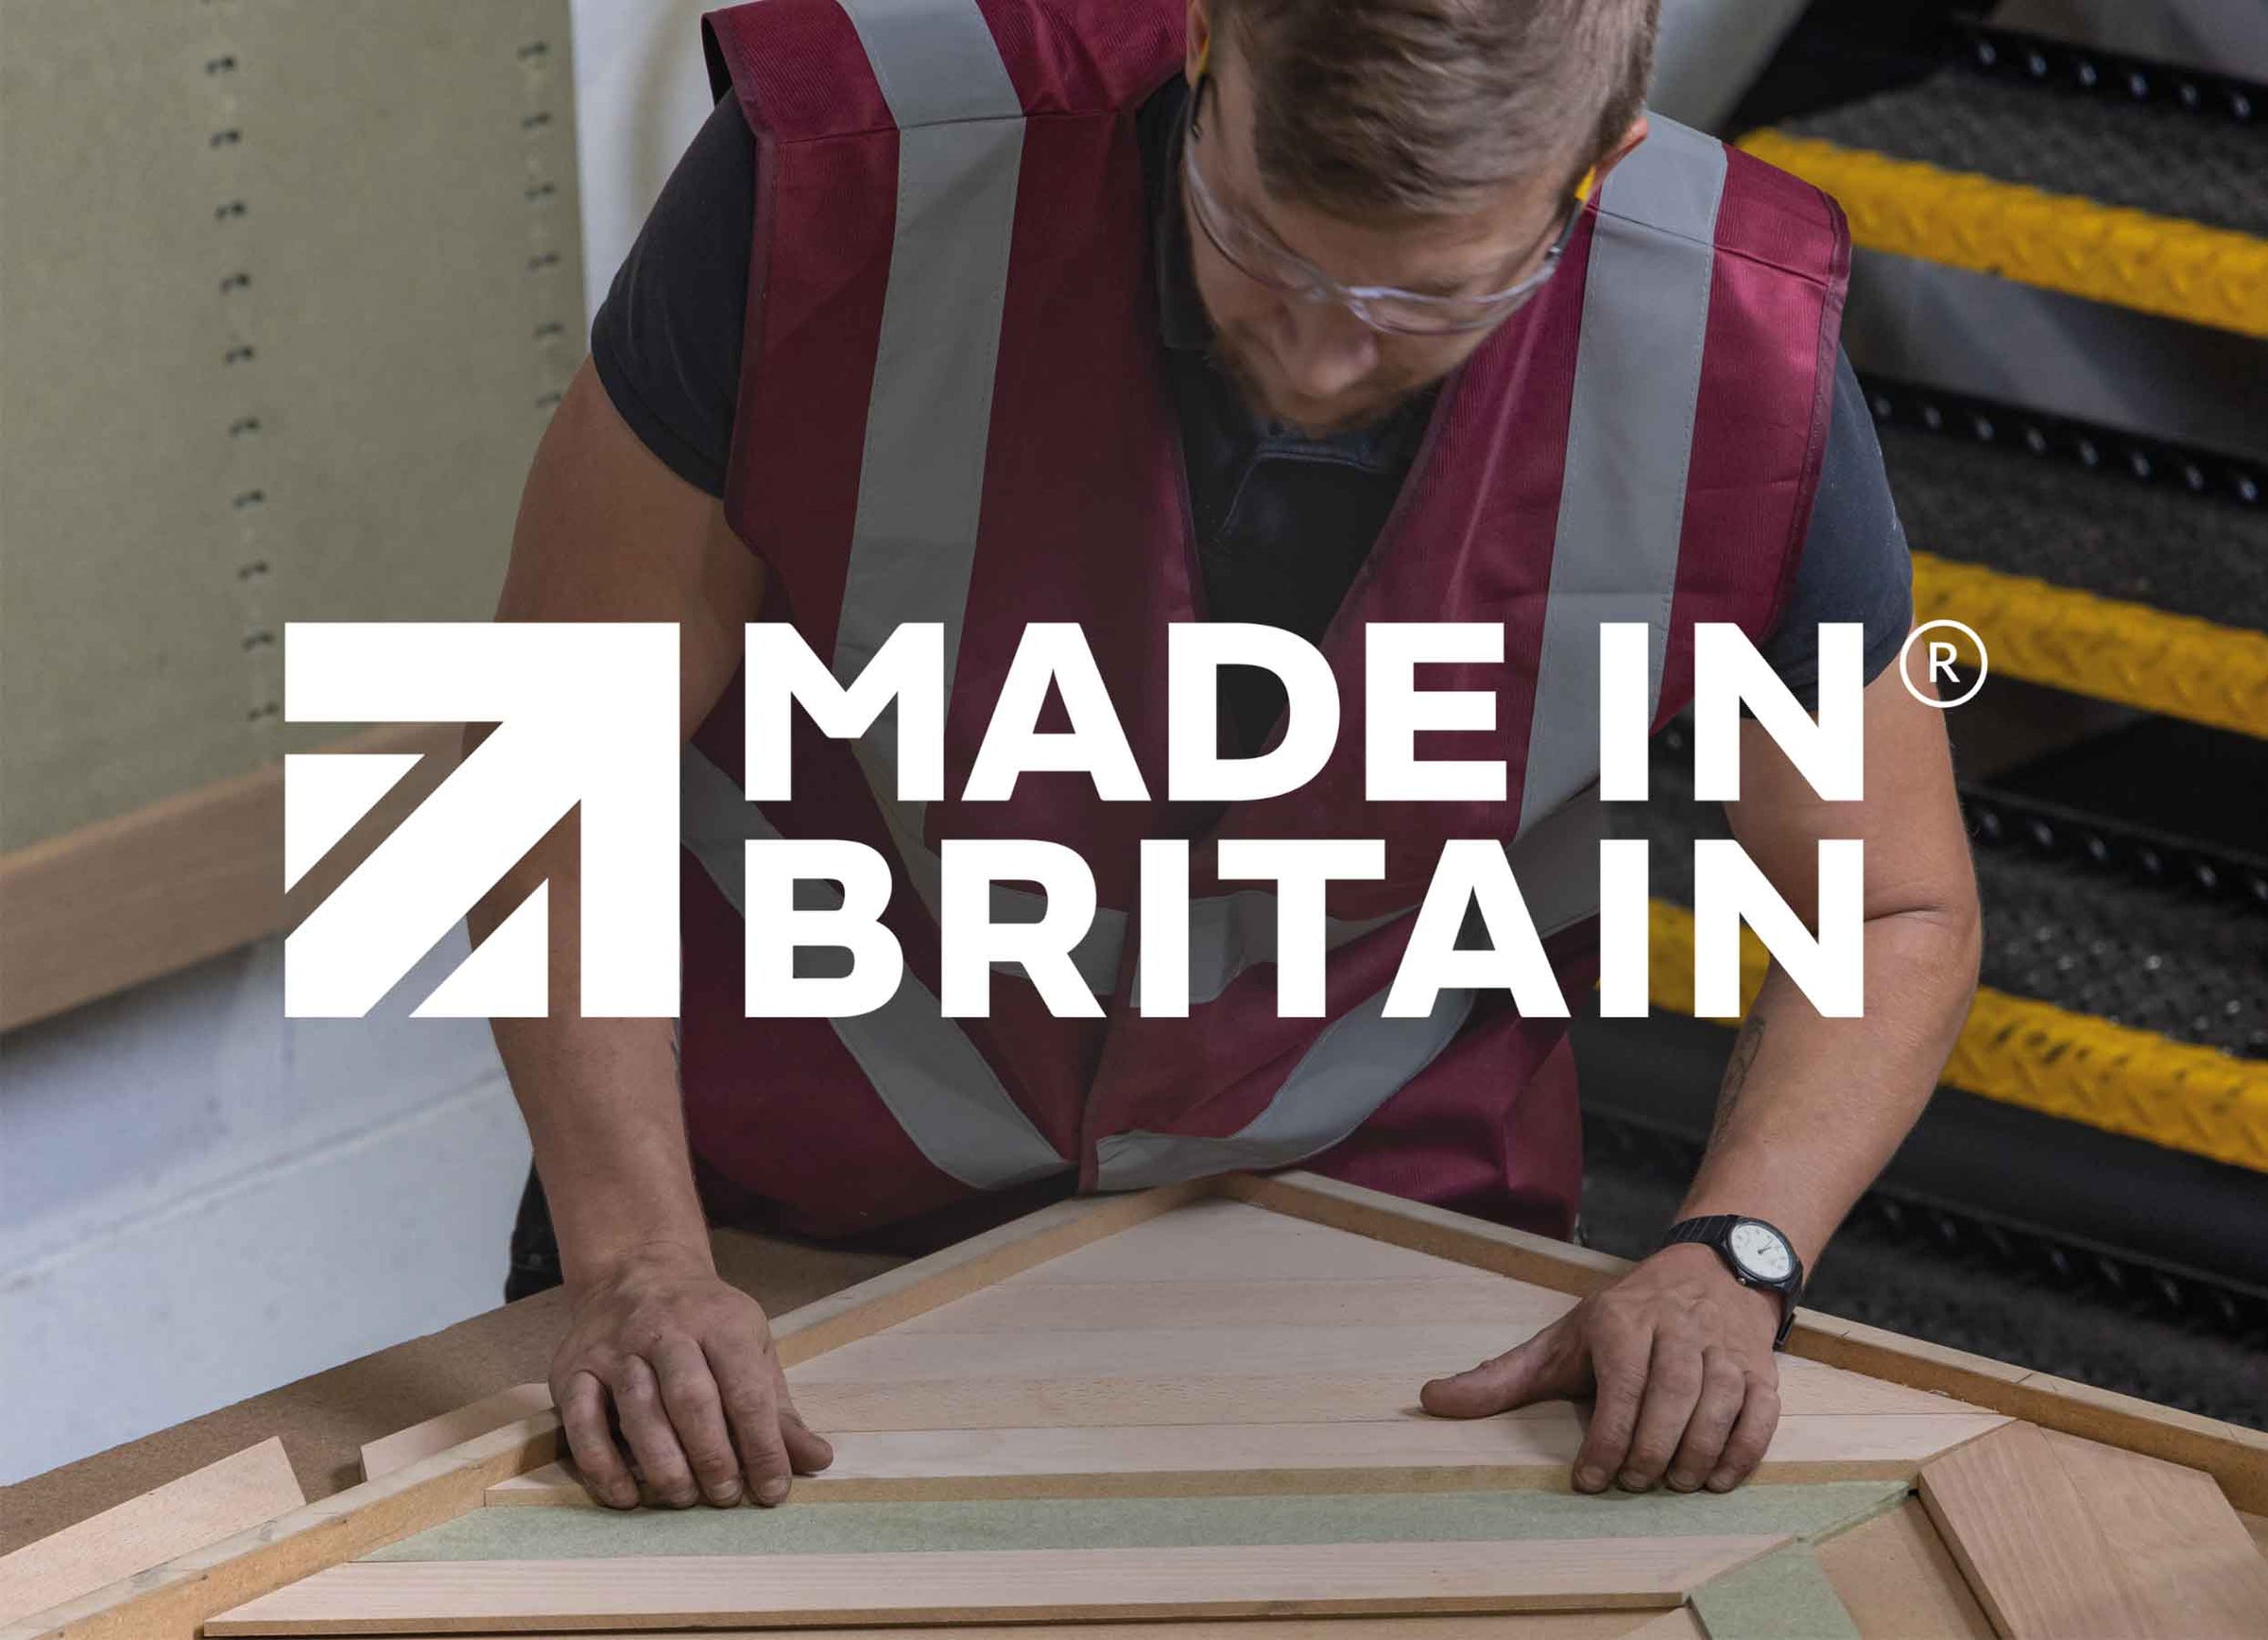 Made in Britain. A craftsperson in Naturewall’s UK factory making a chevron wood wall panel.